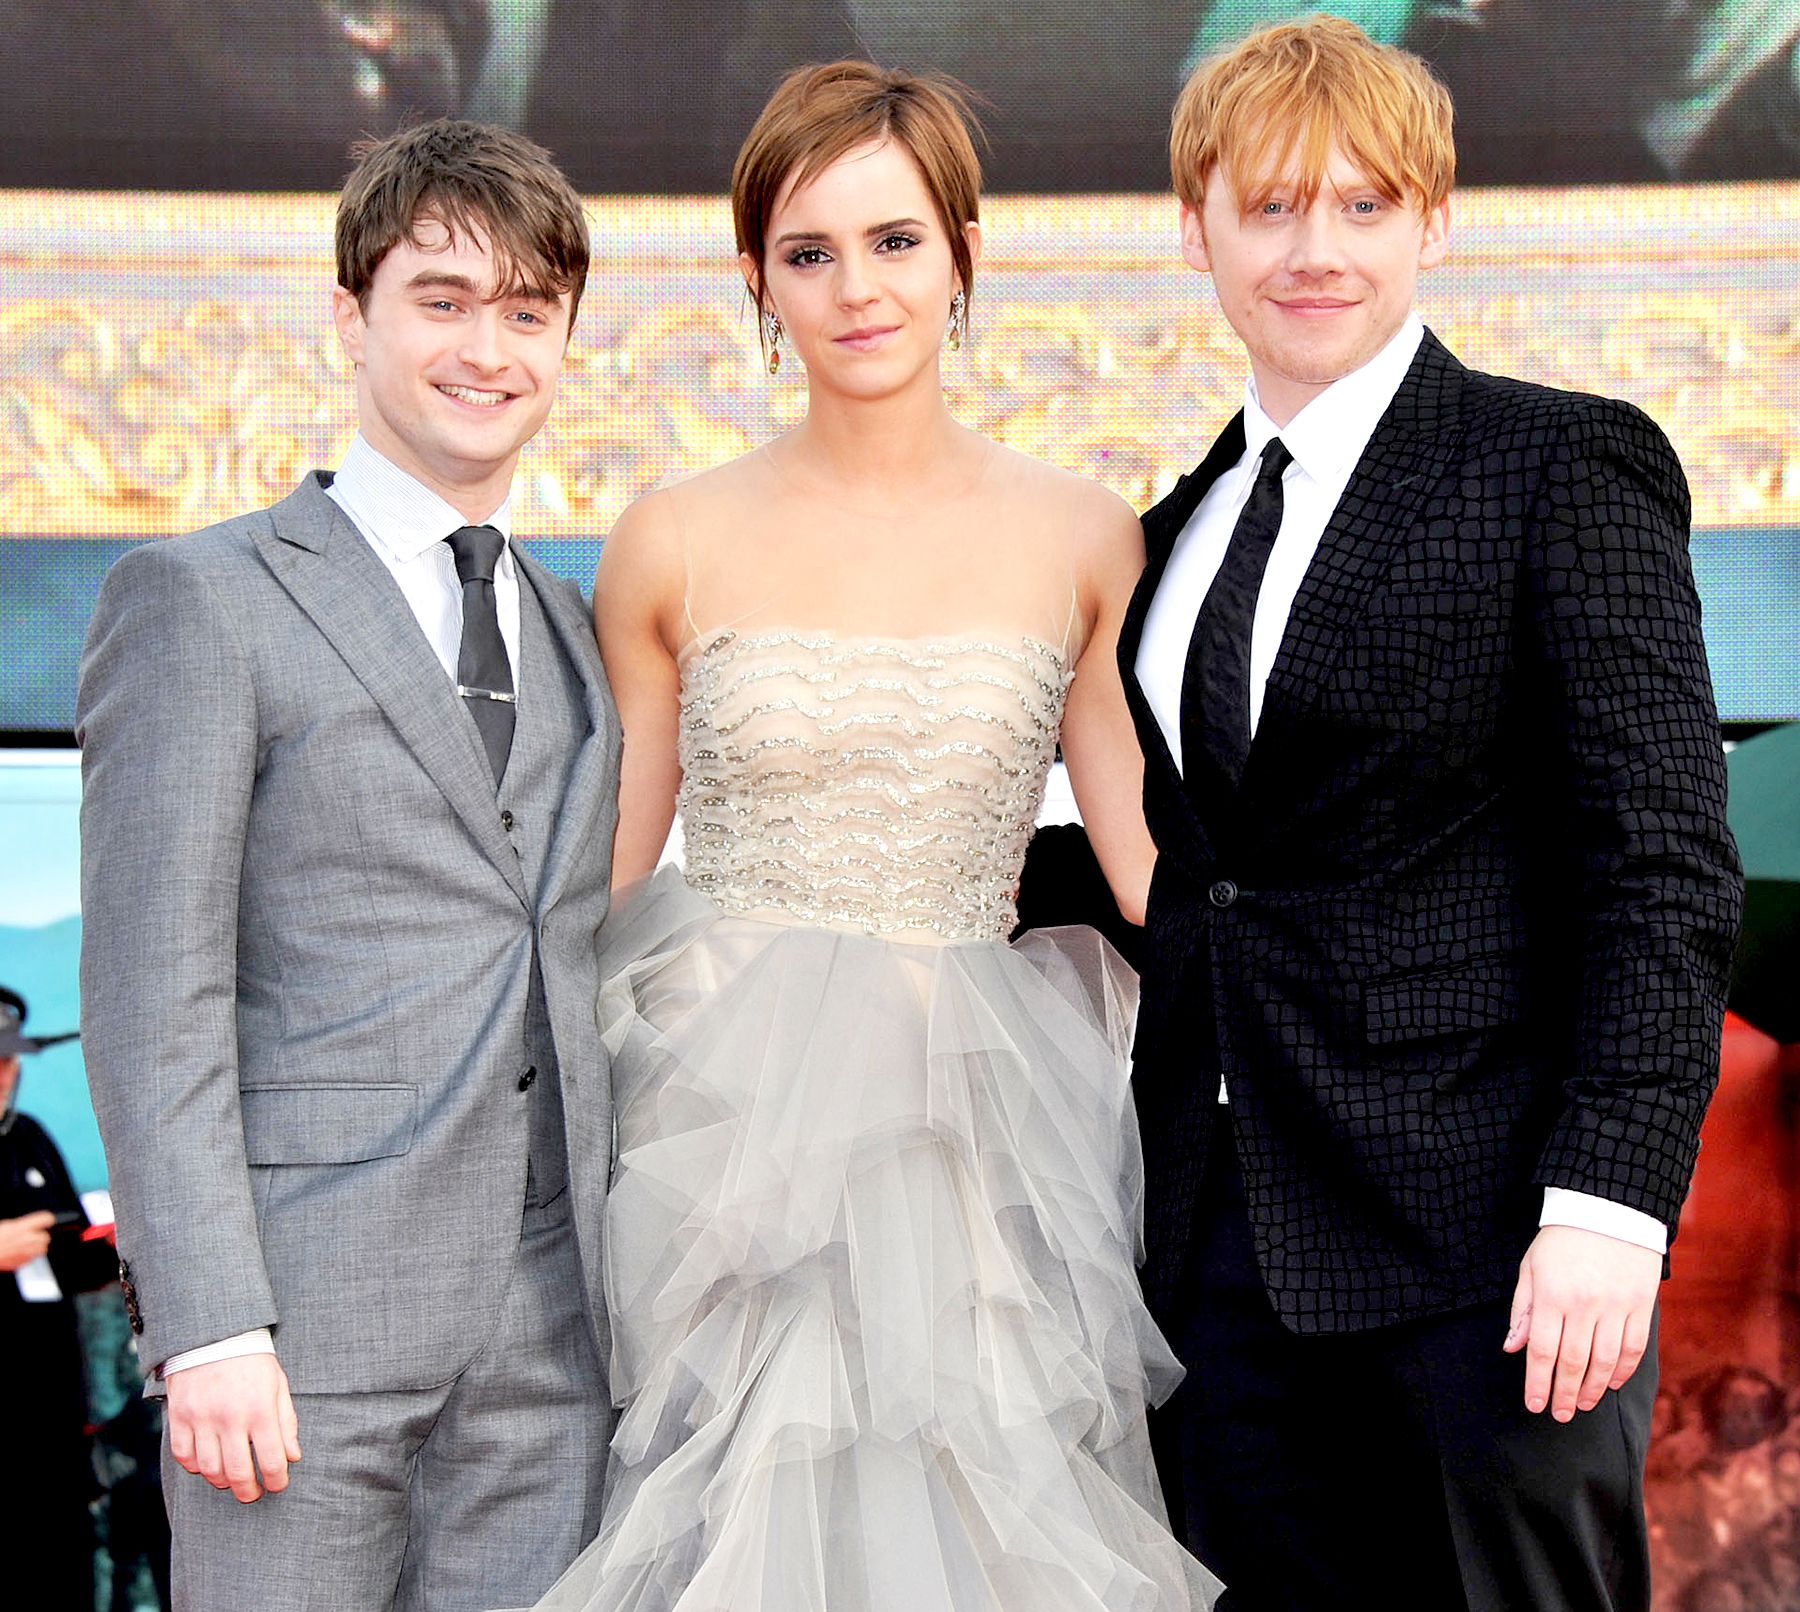 Harry Potter' Costume Designer on Working With Daniel Radcliffe